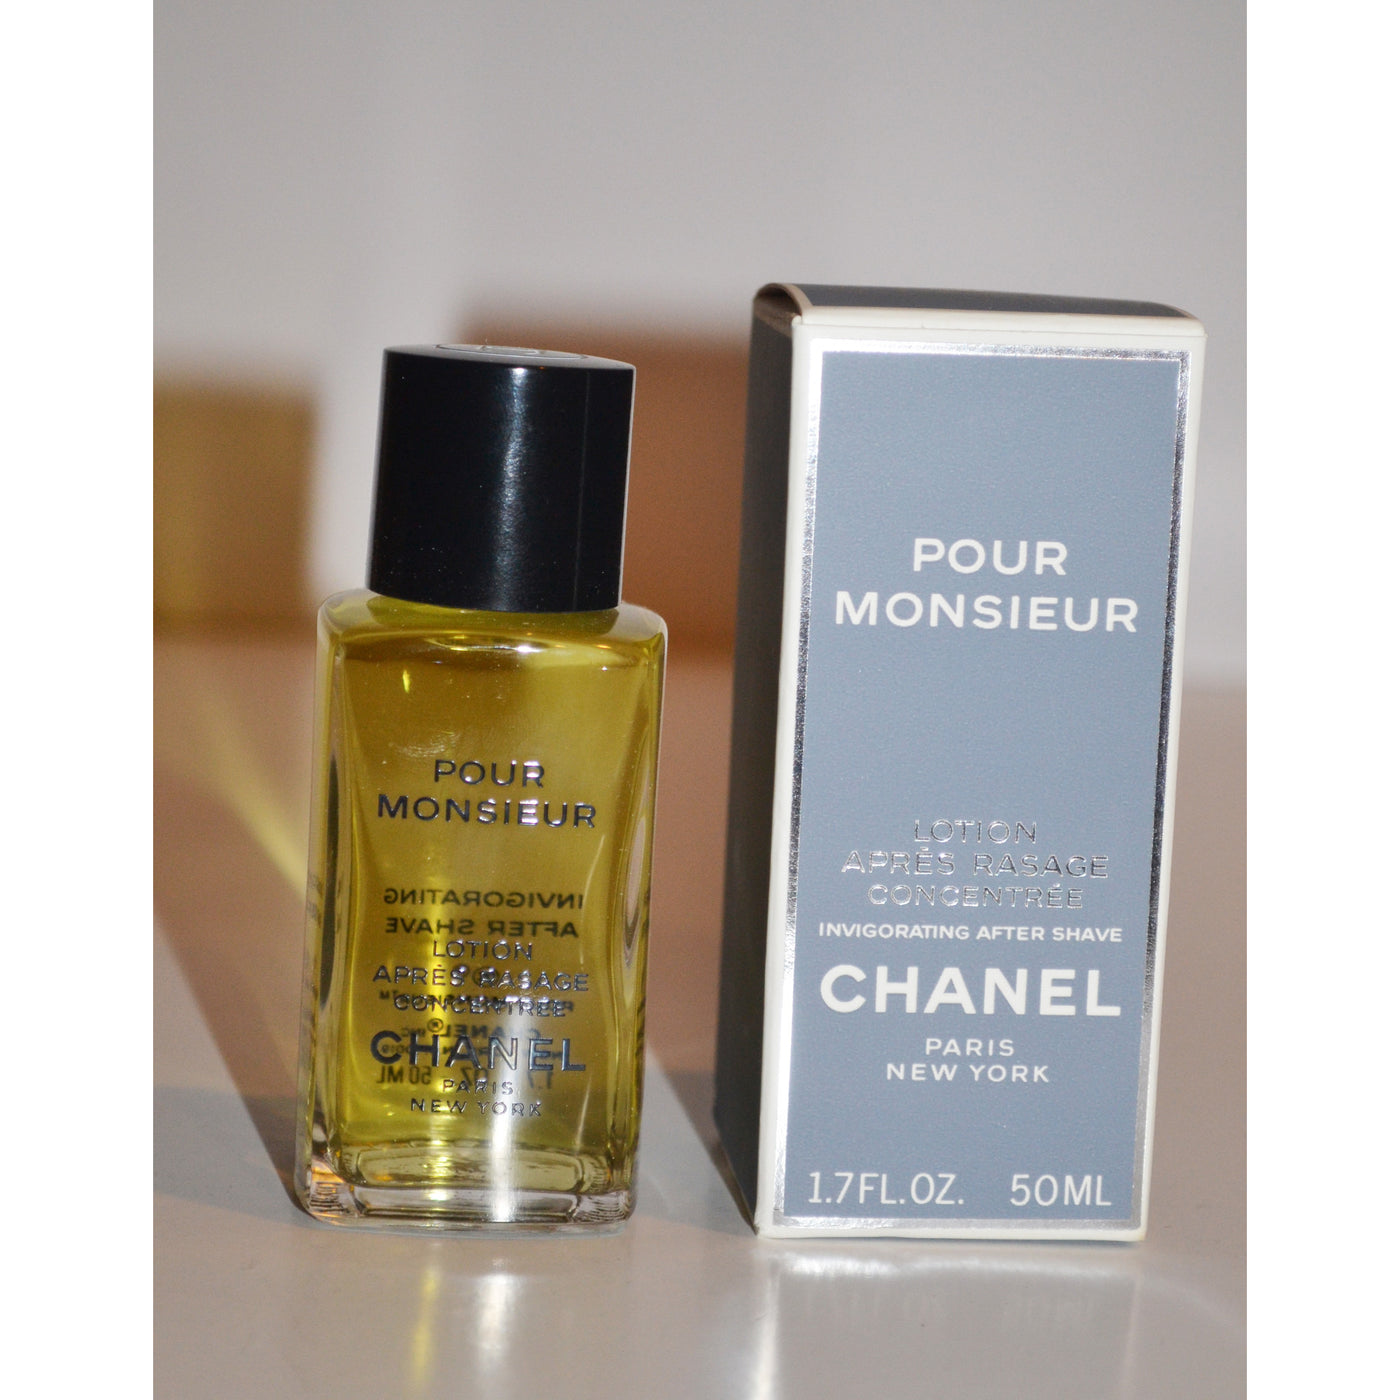 Vintage Monsieur By Chanel Quirky Finds